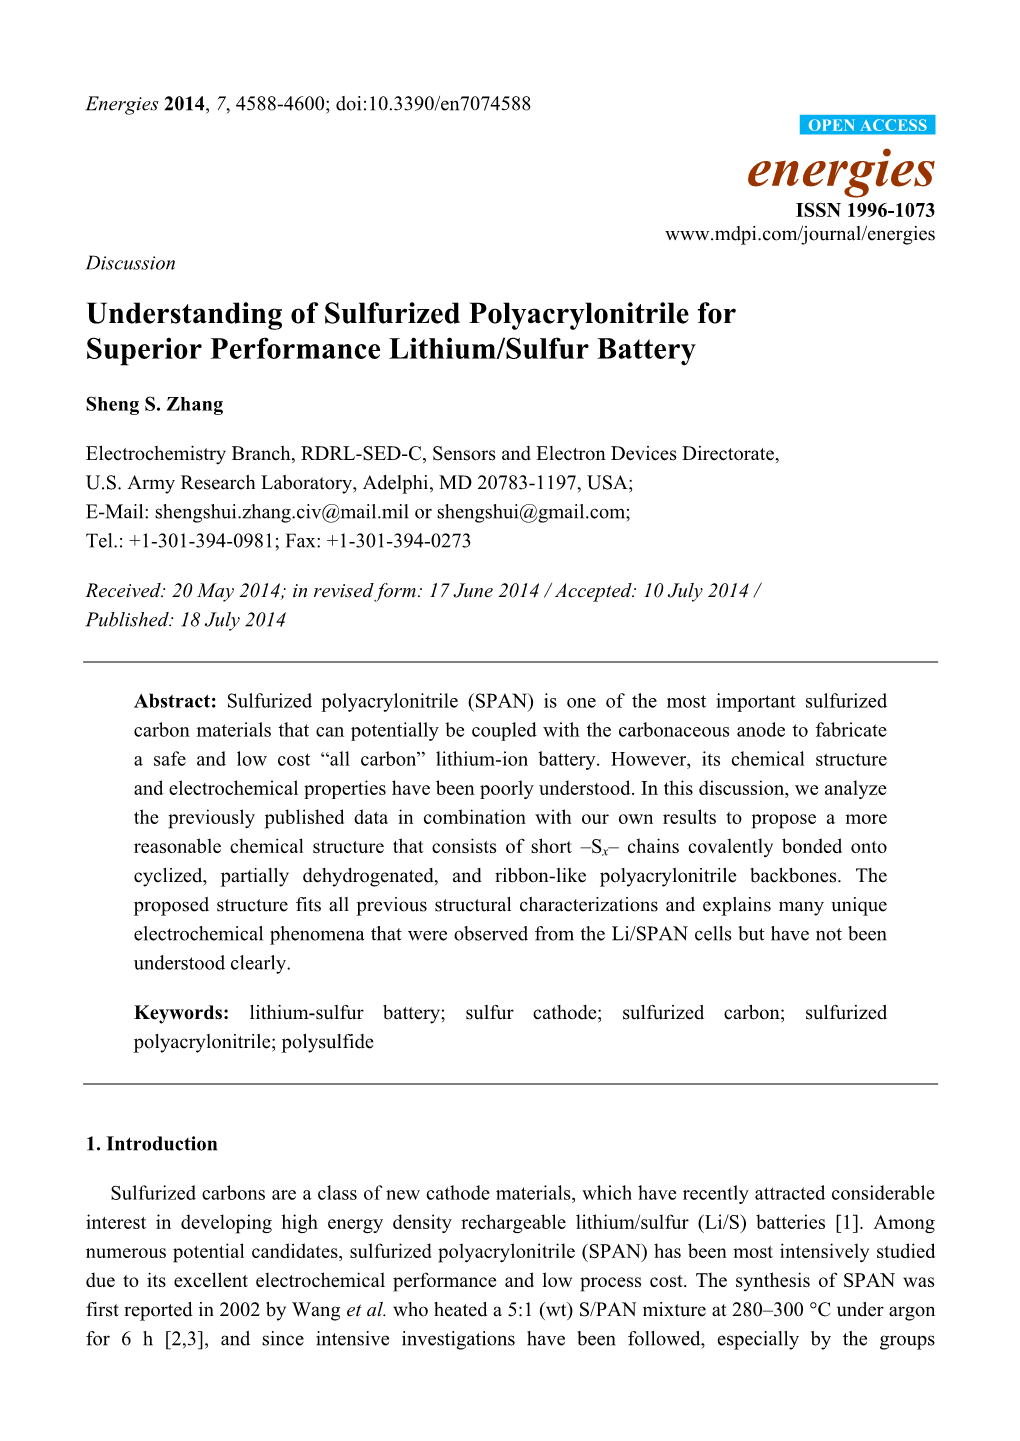 Understanding of Sulfurized Polyacrylonitrile for Superior Performance Lithium/Sulfur Battery